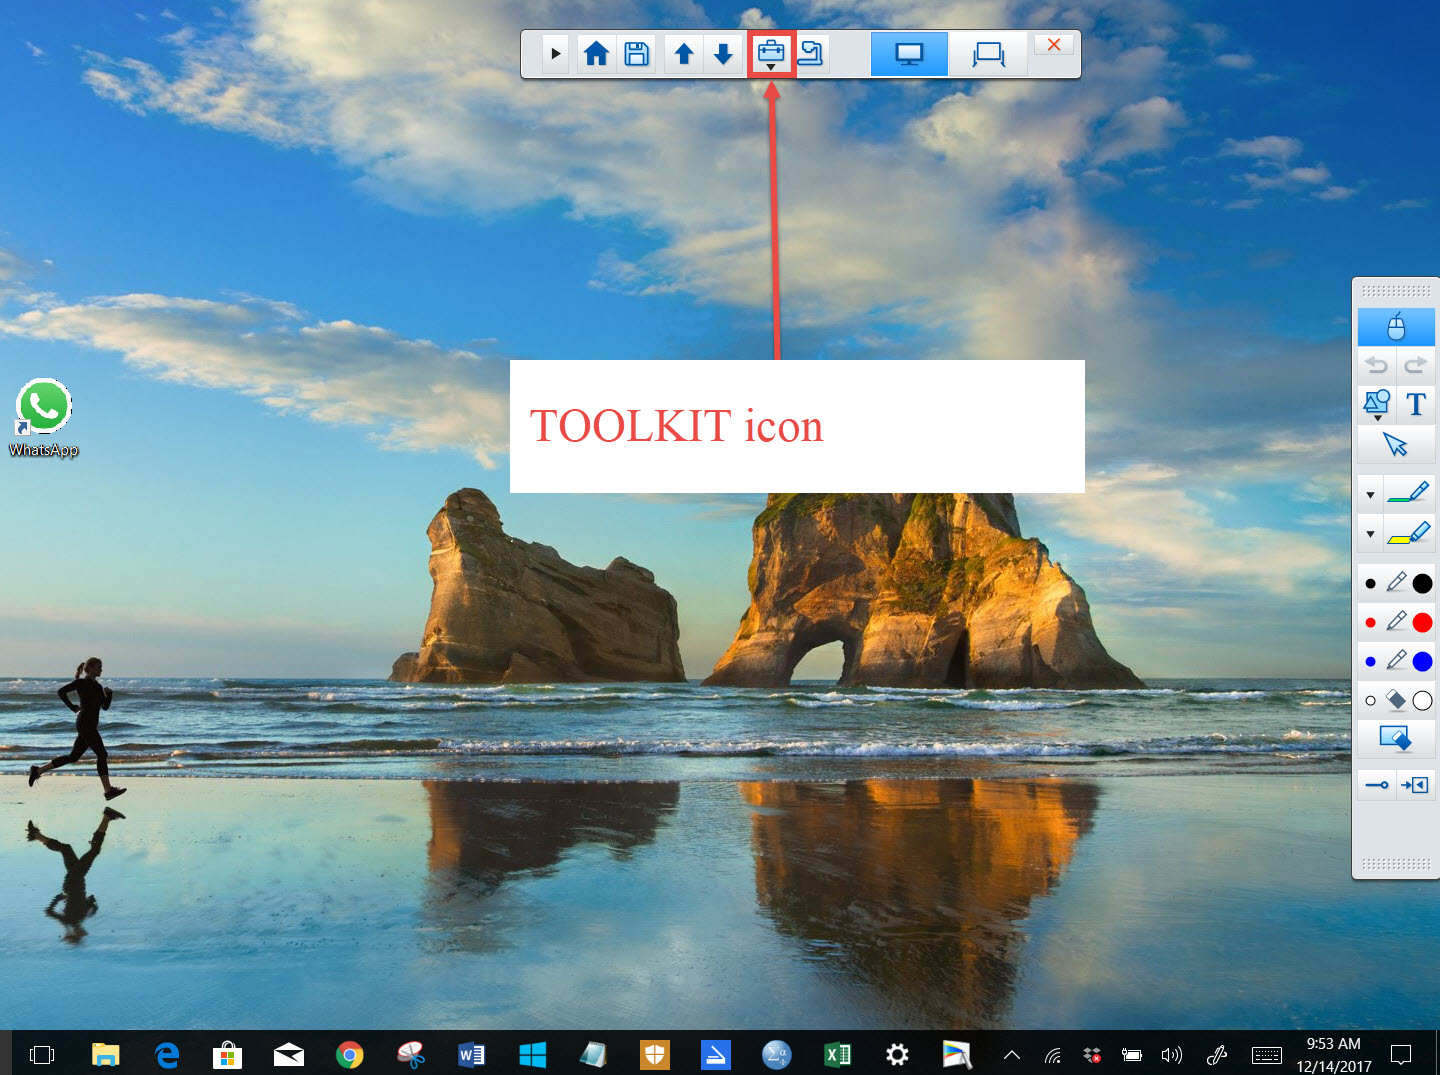 Select the toolkit icon